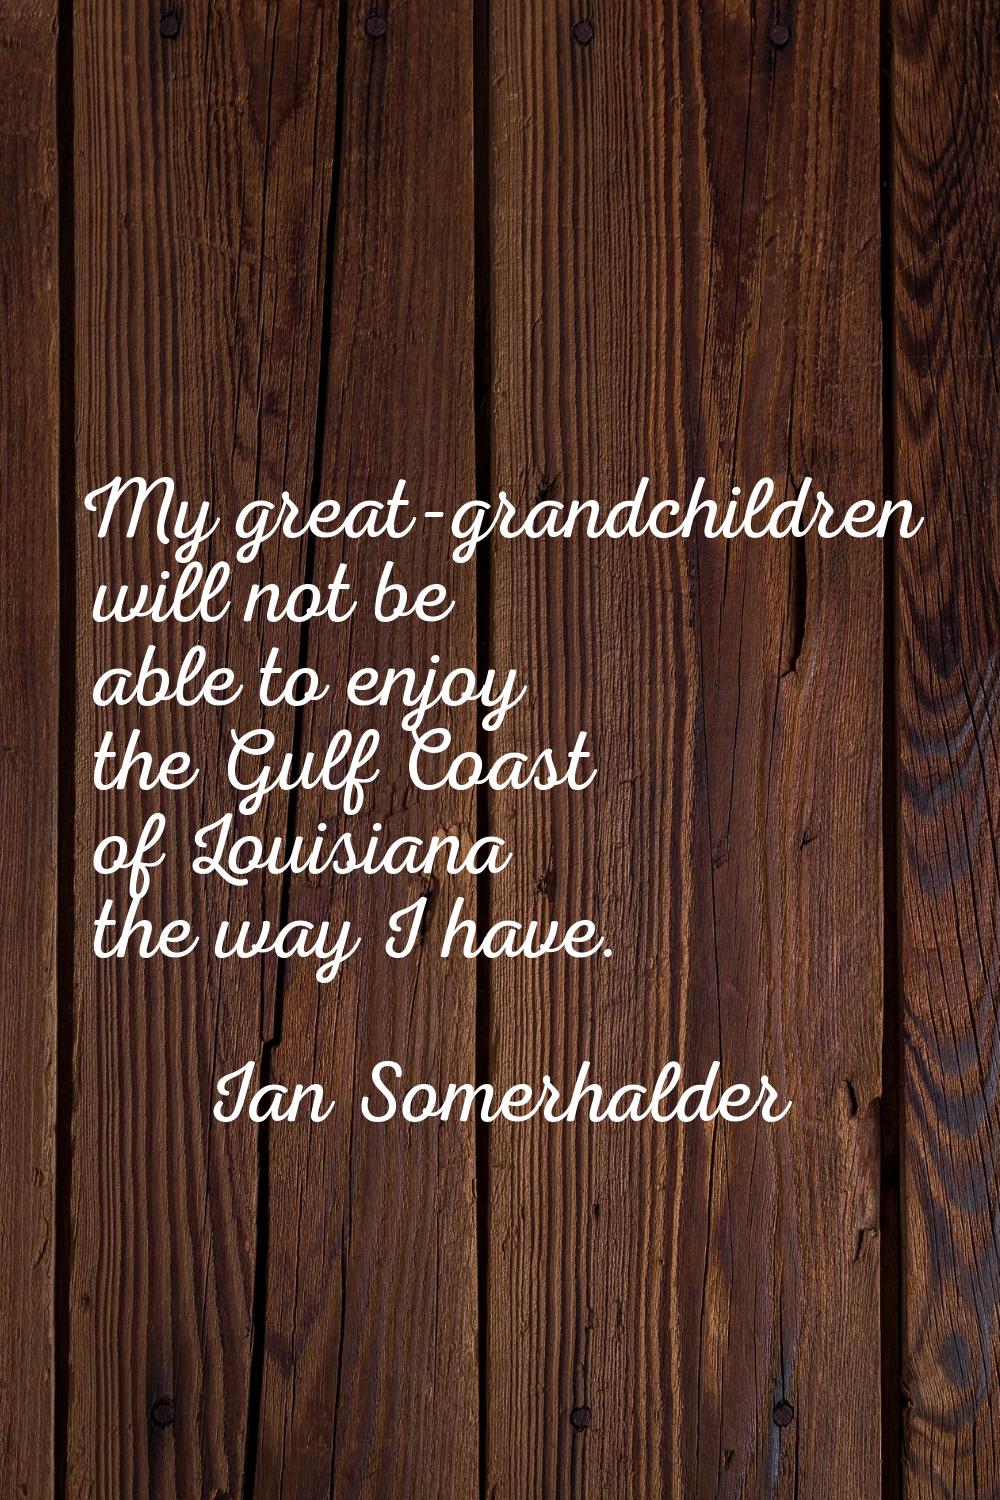 My great-grandchildren will not be able to enjoy the Gulf Coast of Louisiana the way I have.